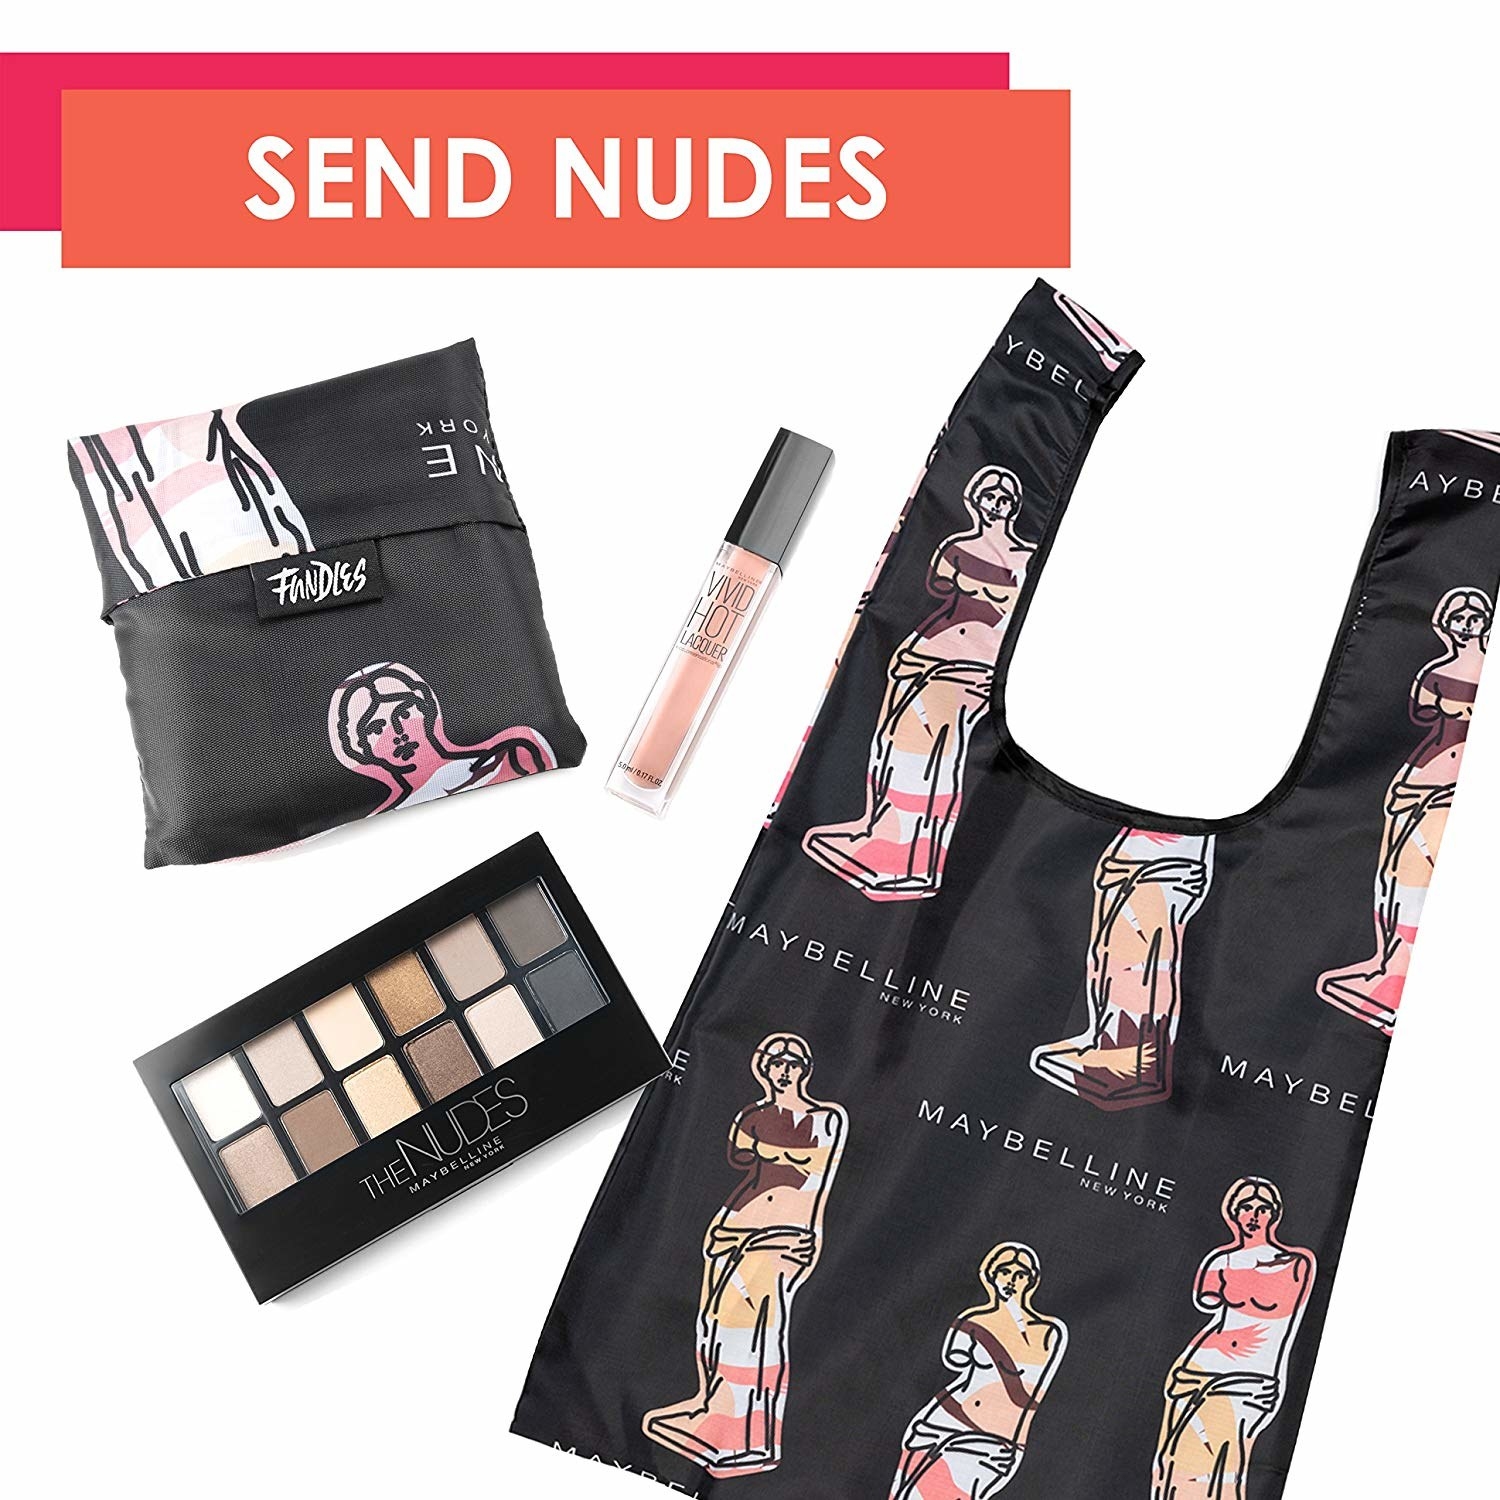 29 Gifts That Will Make All Makeup